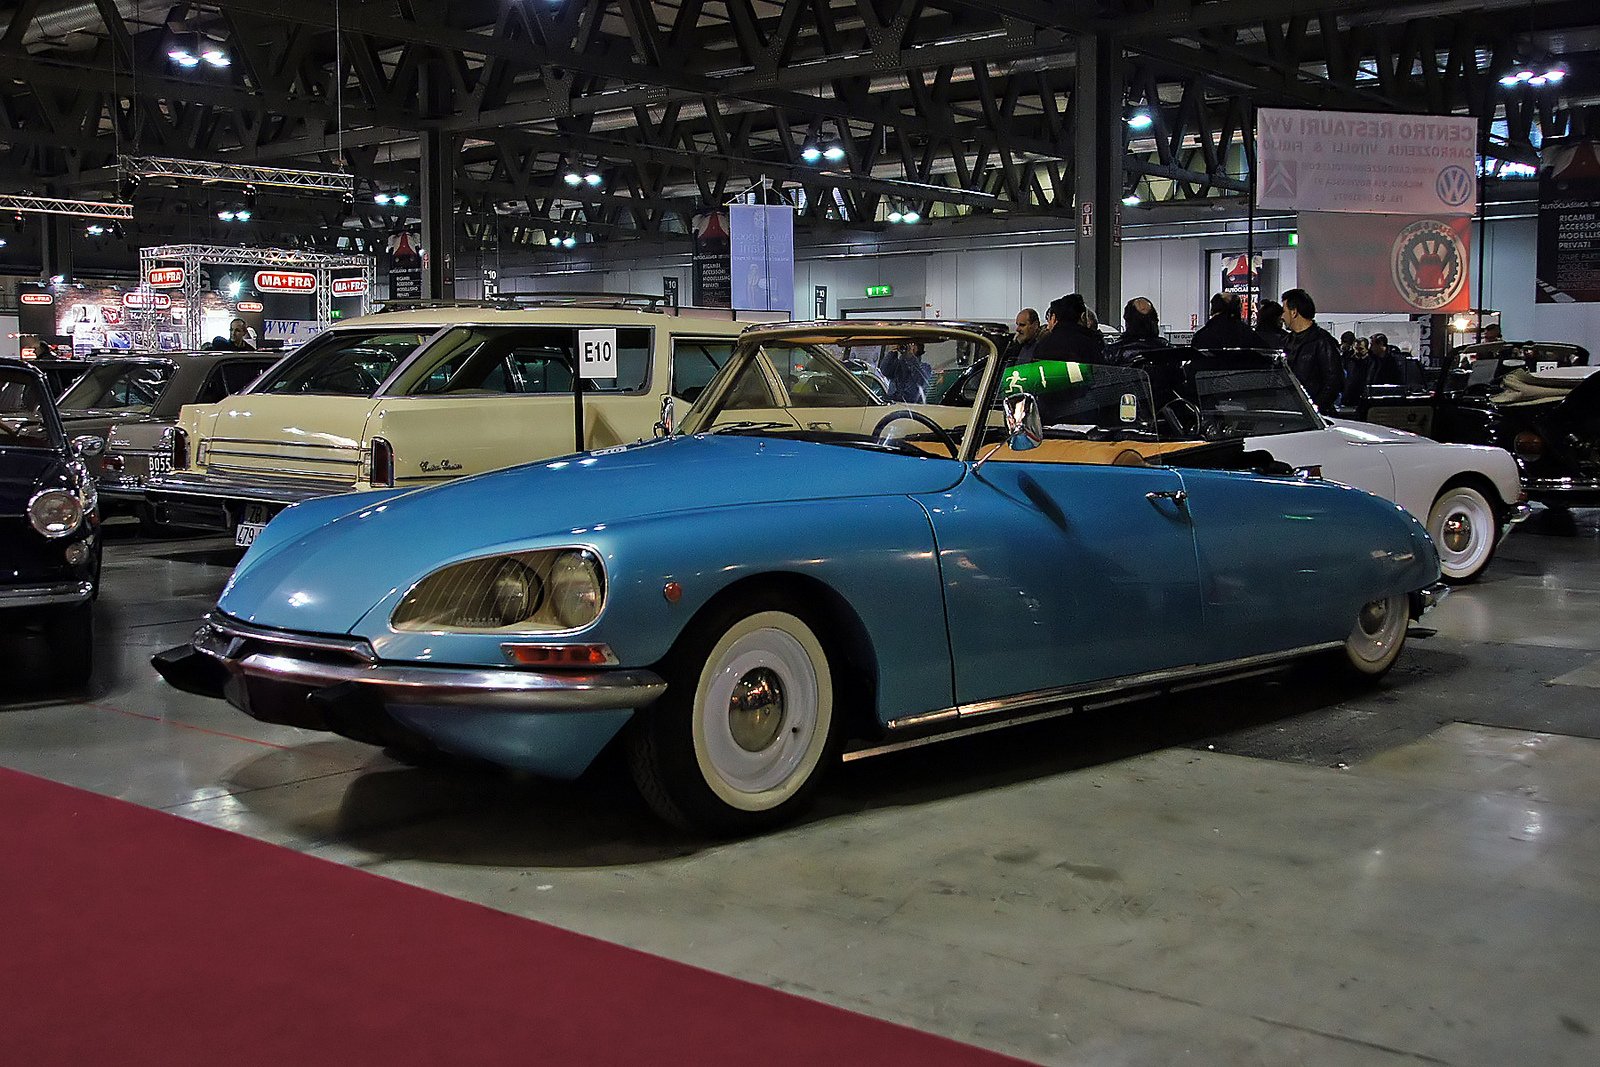 citroen, Ds, Classic, Cars, French, Convertible, Cabriolet Wallpaper